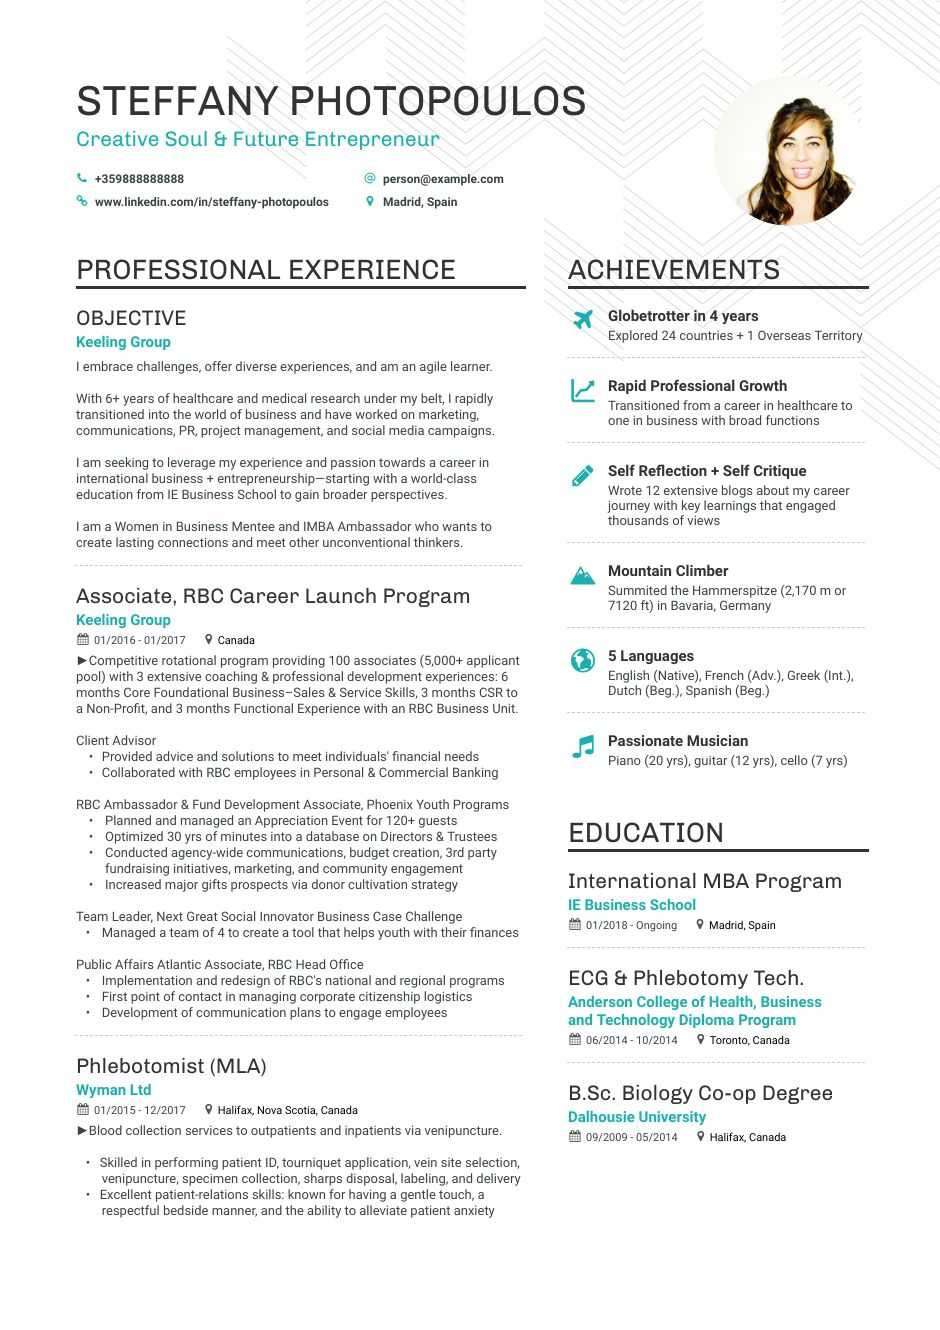 Sample Resume Career Change No Experience Career Change Resume Examples, Skills, Templates & More for 2021